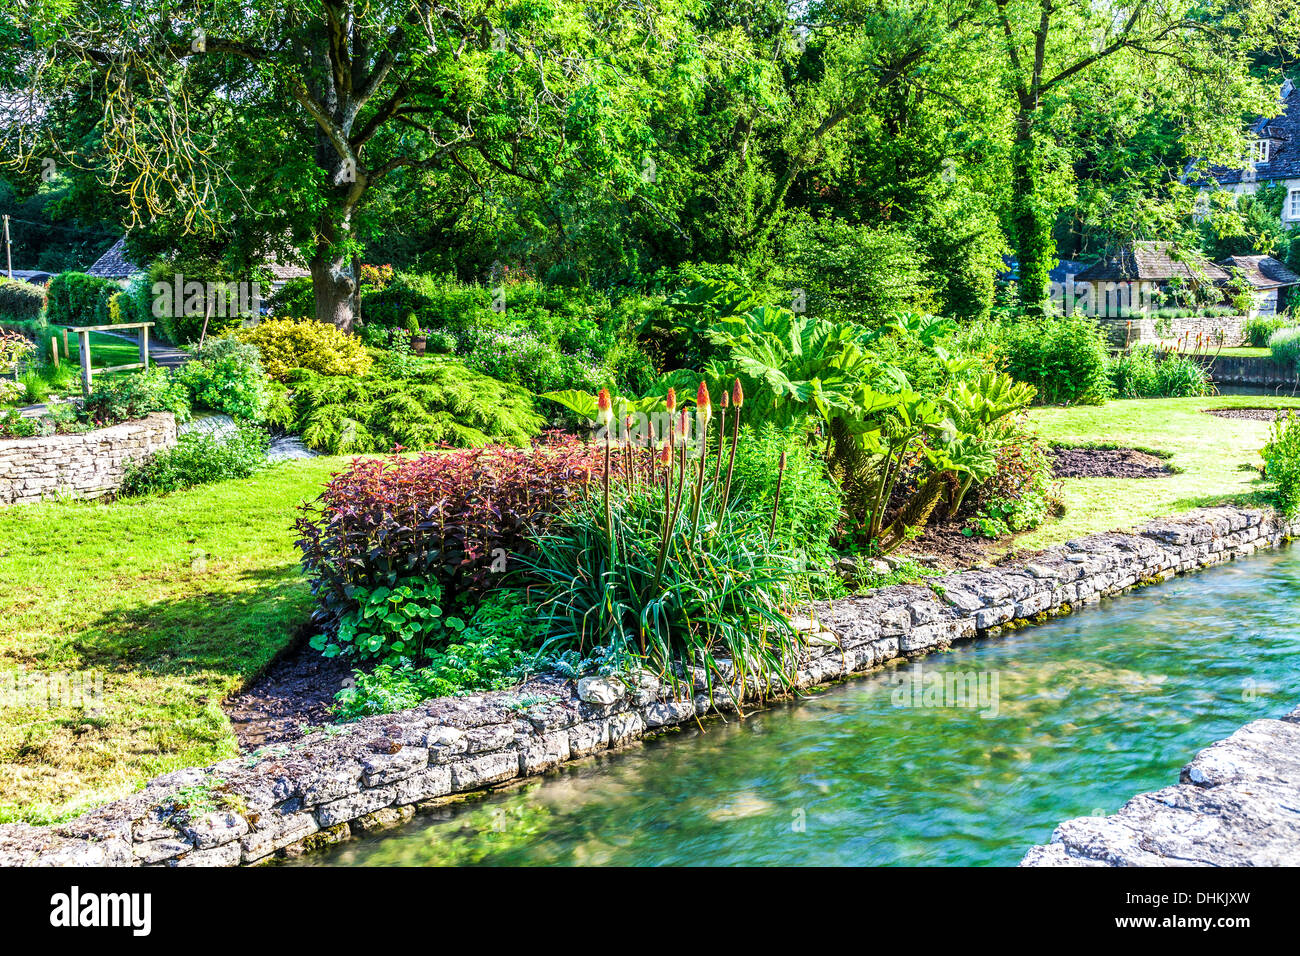 The pretty landscaped garden of the Trout Farm in the Cotswold village of Bibury in the Coln Valley. Stock Photo